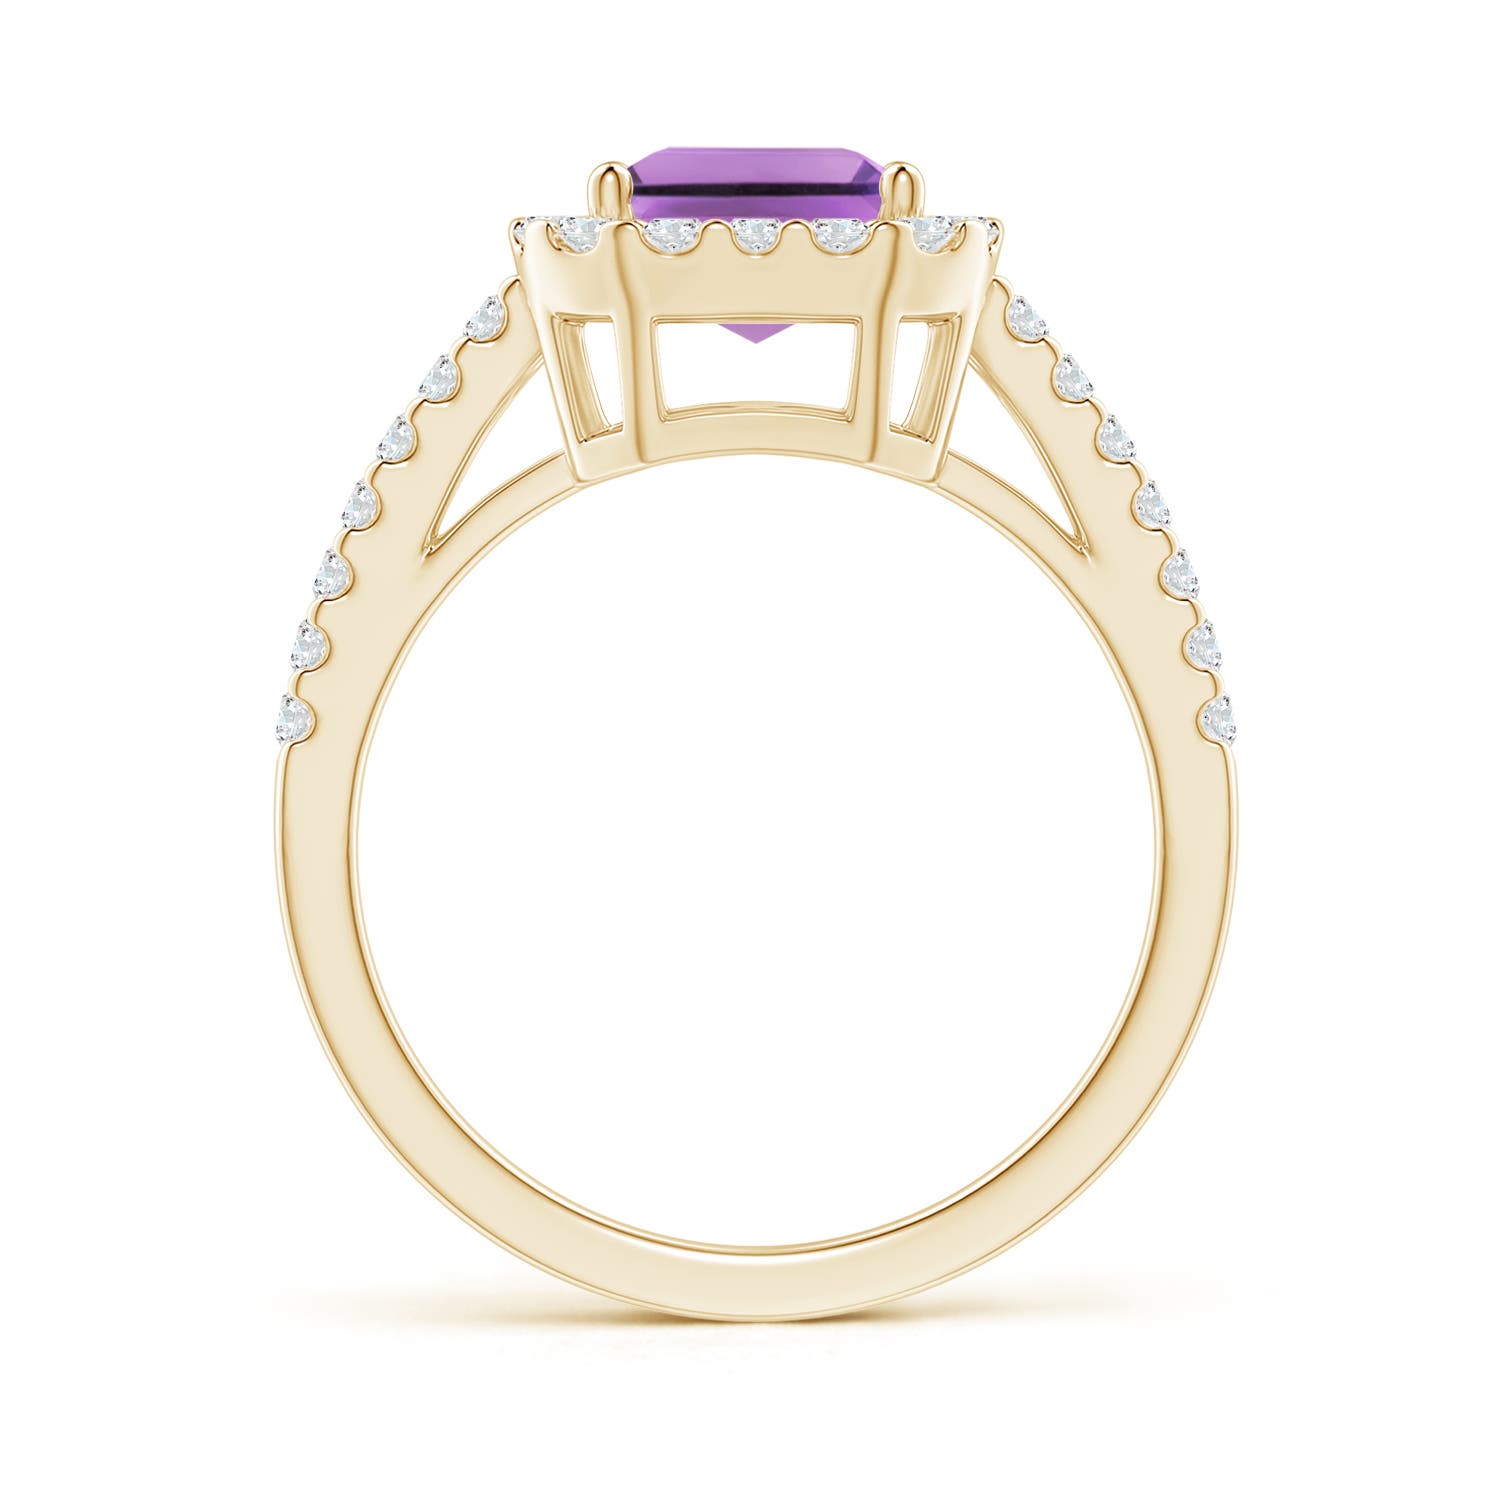 A - Amethyst / 2.68 CT / 14 KT Yellow Gold